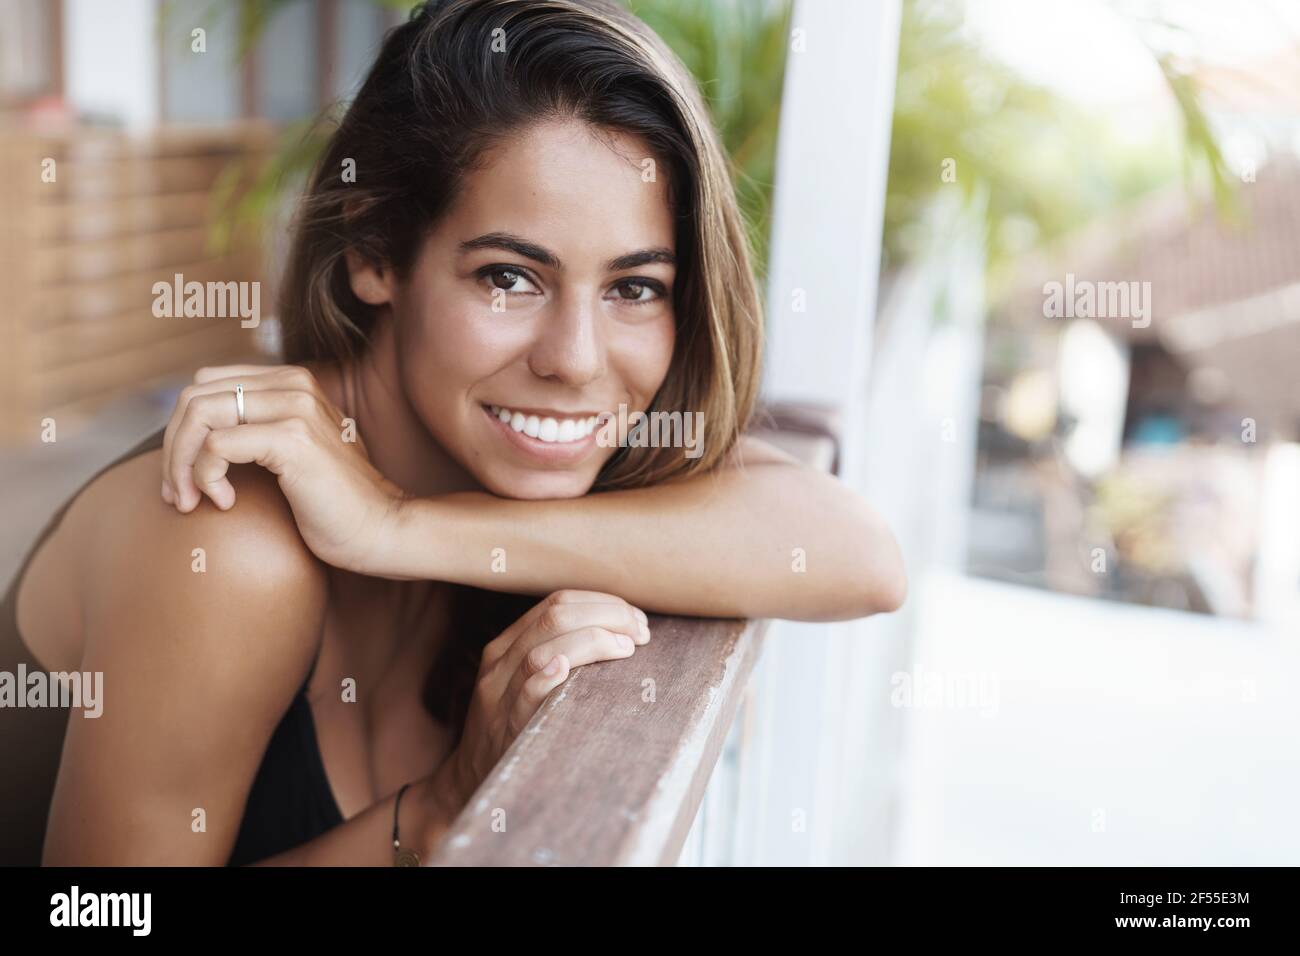 Close-up lovely tanned girlfriend pierced nose tanned skin lean handrail cafe terrace turn camera happily smiling thankful dream come true girl Stock Photo